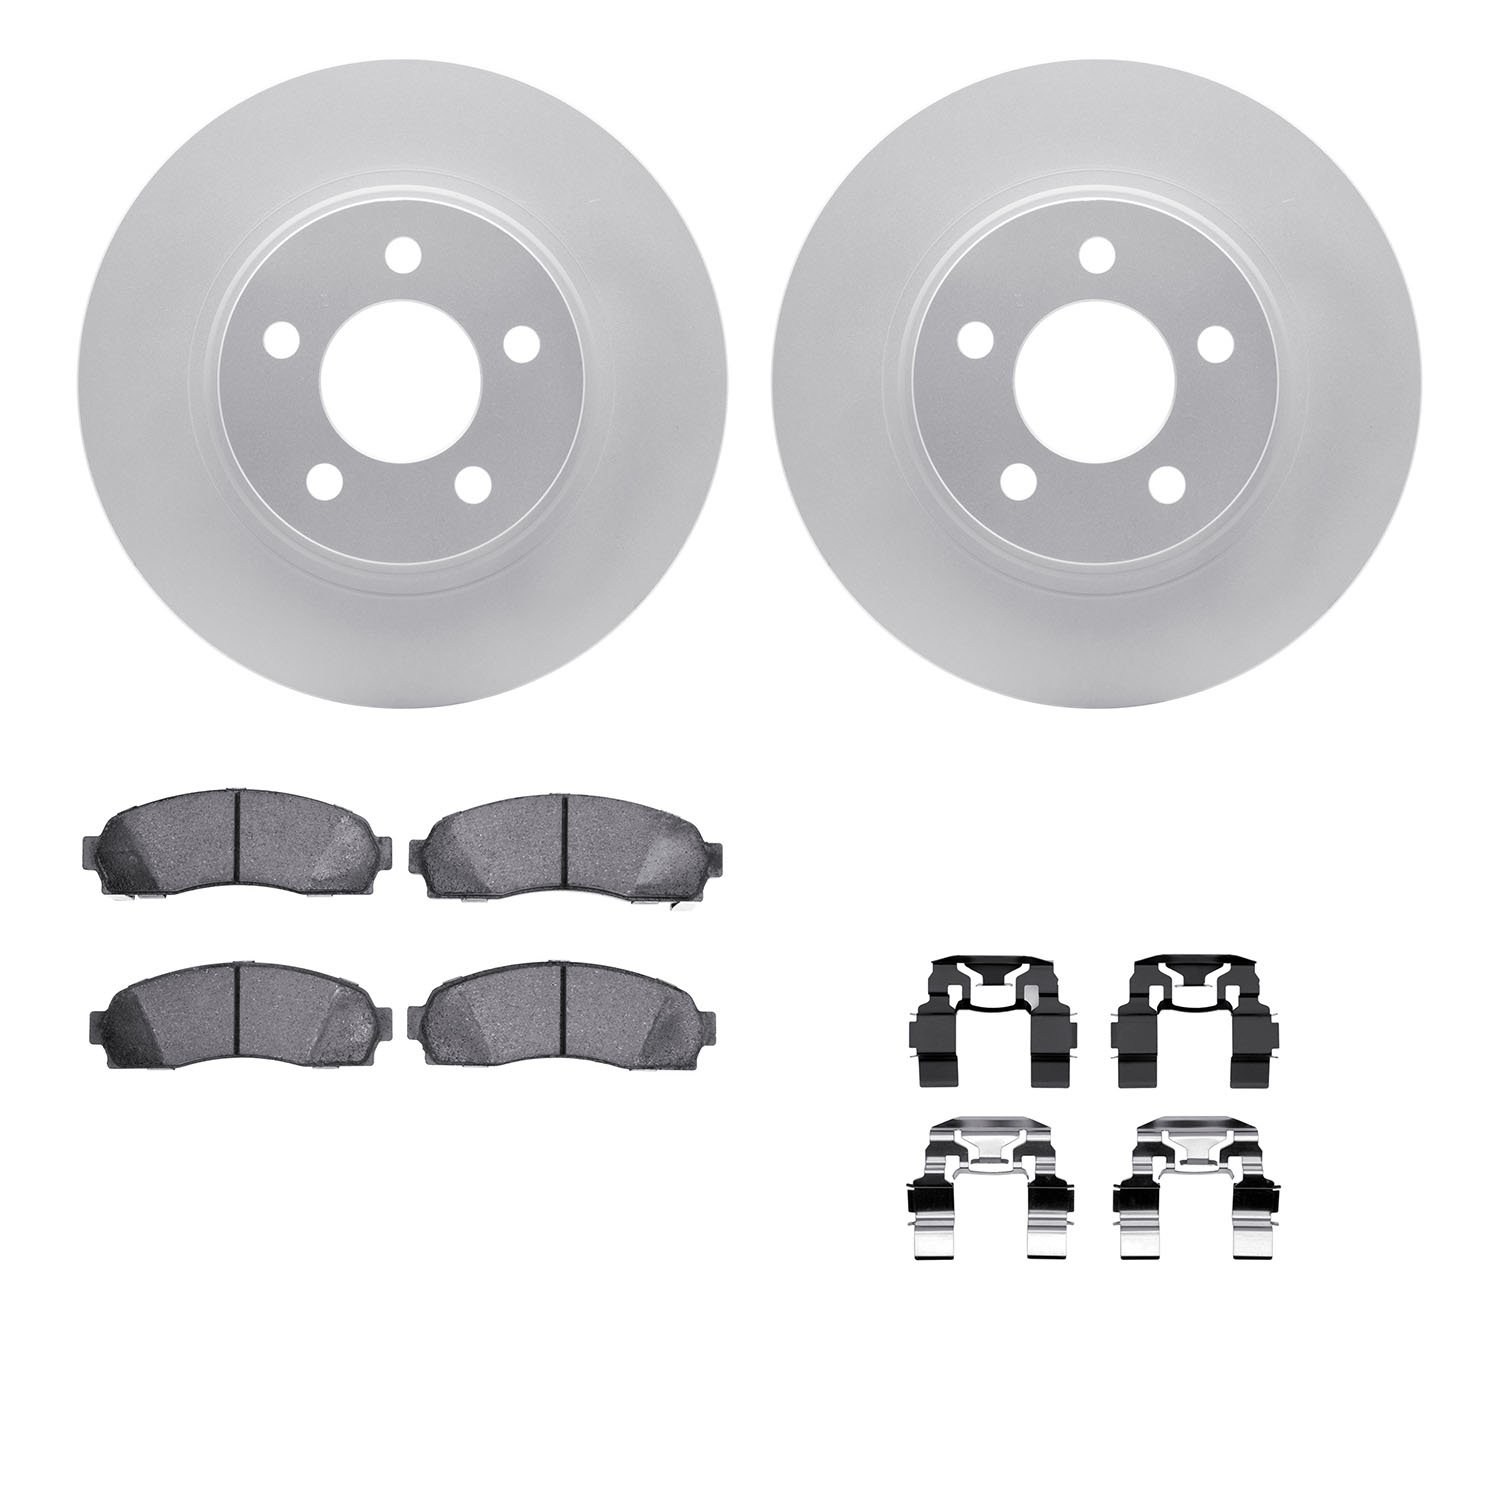 4412-54033 Geospec Brake Rotors with Ultimate-Duty Brake Pads & Hardware, 2001-2005 Ford/Lincoln/Mercury/Mazda, Position: Front